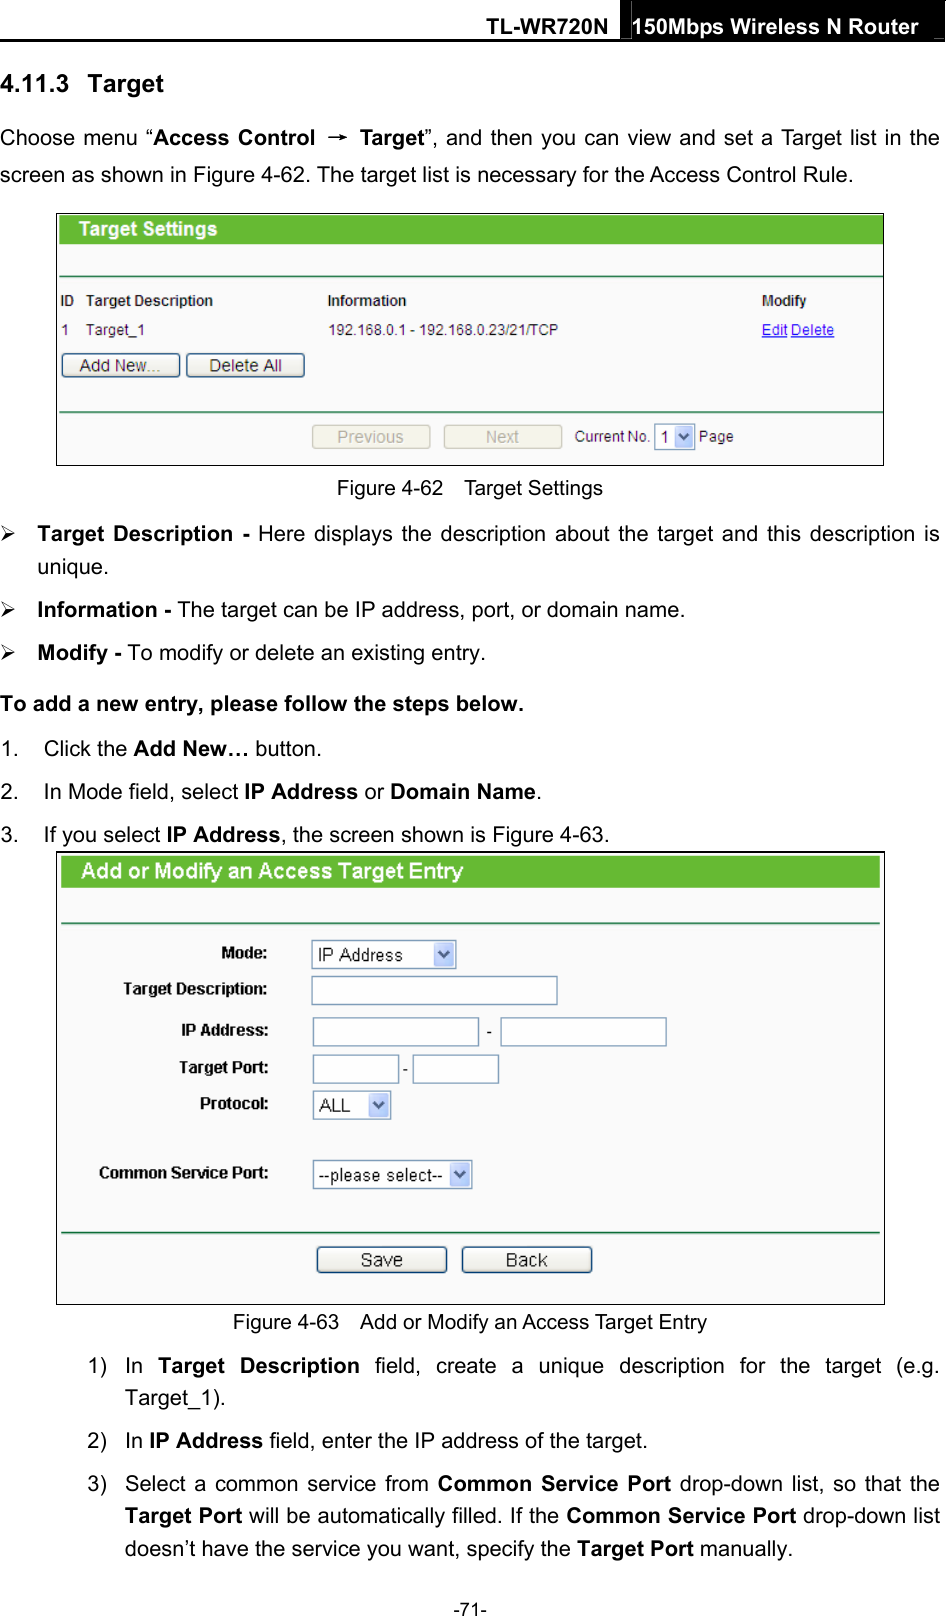 TL-WR720N 150Mbps Wireless N Router  4.11.3  Target Choose menu “Access Control  → Target”, and then you can view and set a Target list in the screen as shown in Figure 4-62. The target list is necessary for the Access Control Rule.  Figure 4-62  Target Settings  Target Description - Here displays the description about the target and this description is unique.   Information - The target can be IP address, port, or domain name.    Modify - To modify or delete an existing entry.   To add a new entry, please follow the steps below. 1. Click the Add New… button. 2.  In Mode field, select IP Address or Domain Name. 3.  If you select IP Address, the screen shown is Figure 4-63.   Figure 4-63    Add or Modify an Access Target Entry 1) In Target Description field, create a unique description for the target (e.g. Target_1). 2) In IP Address field, enter the IP address of the target. 3)  Select a common service from Common Service Port drop-down list, so that the Target Port will be automatically filled. If the Common Service Port drop-down list doesn’t have the service you want, specify the Target Port manually. -71- 